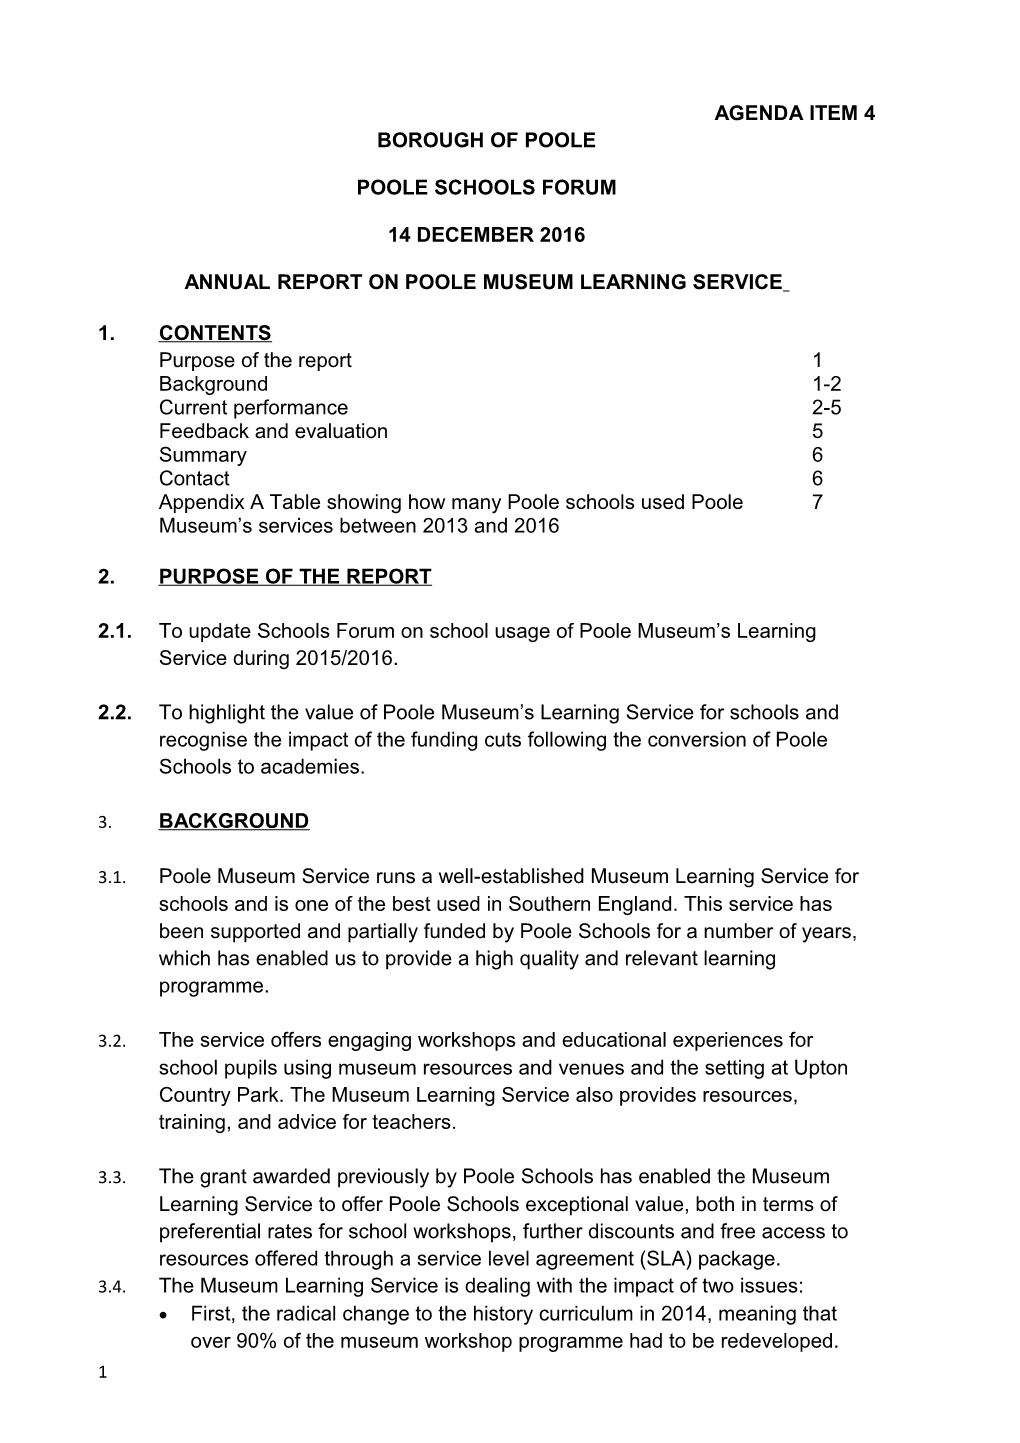 Annual Report on Poole Museum Learning Service